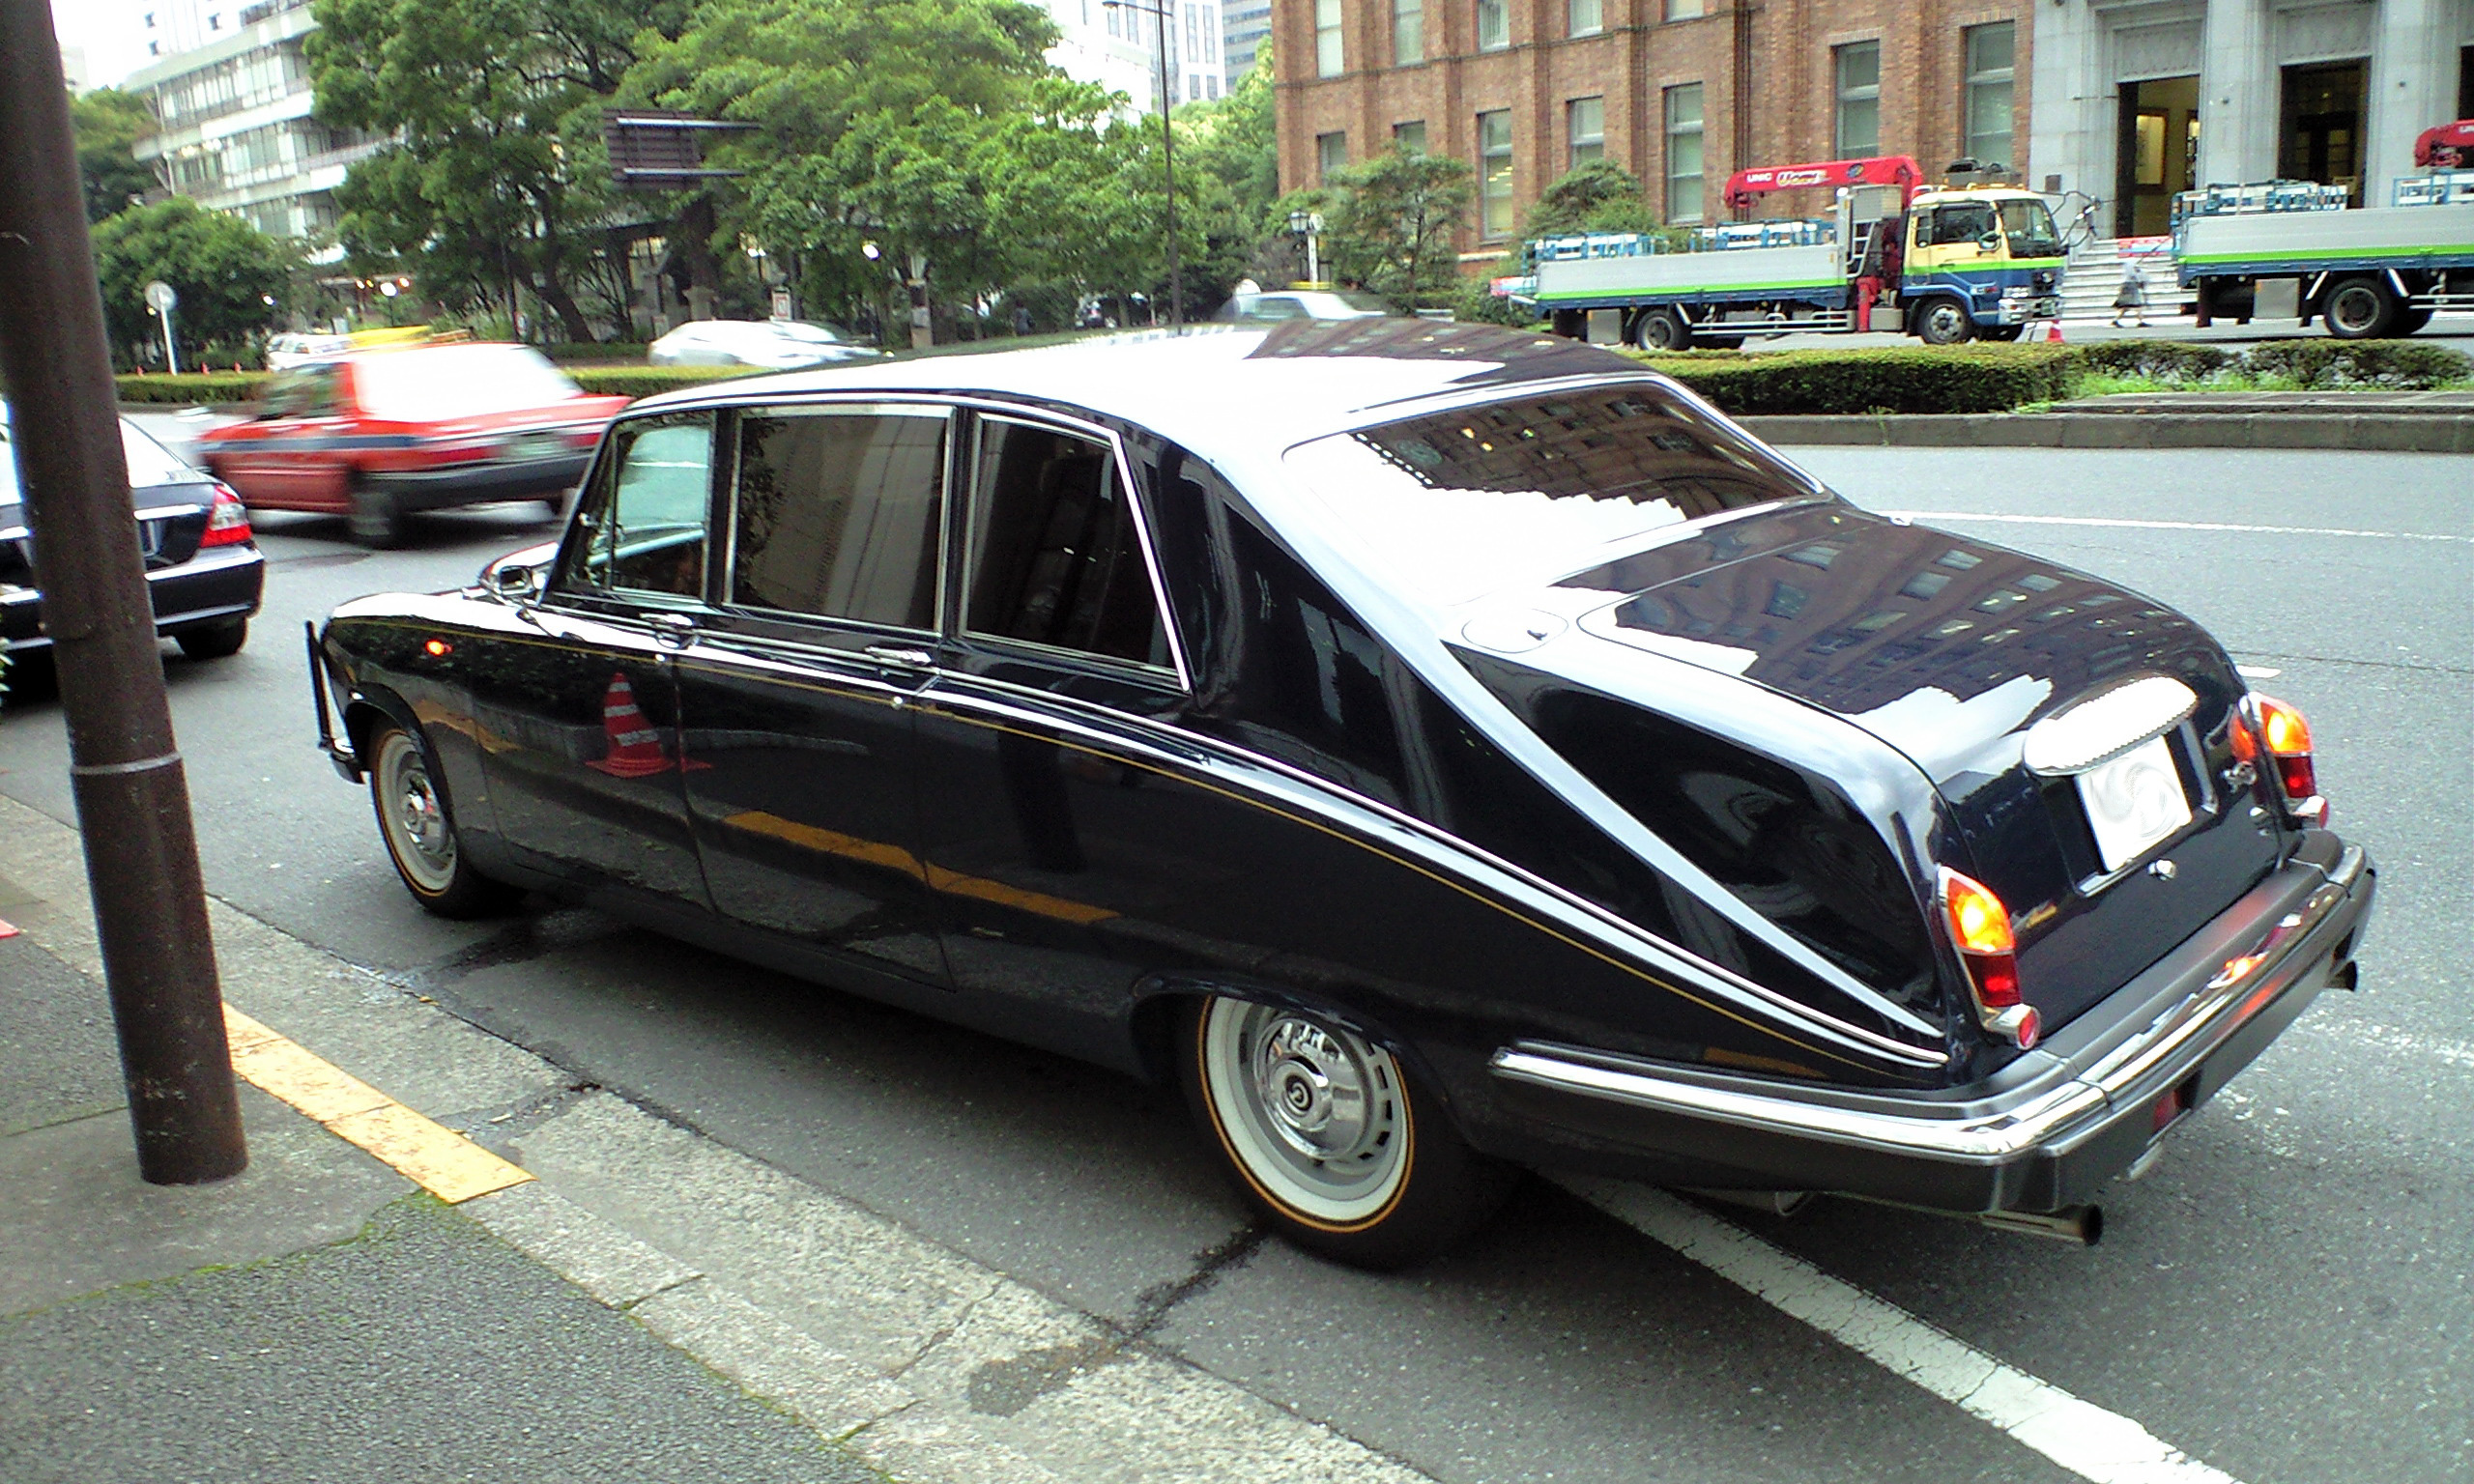 Daimler ds 420 limousine. Best photos and information of modification.